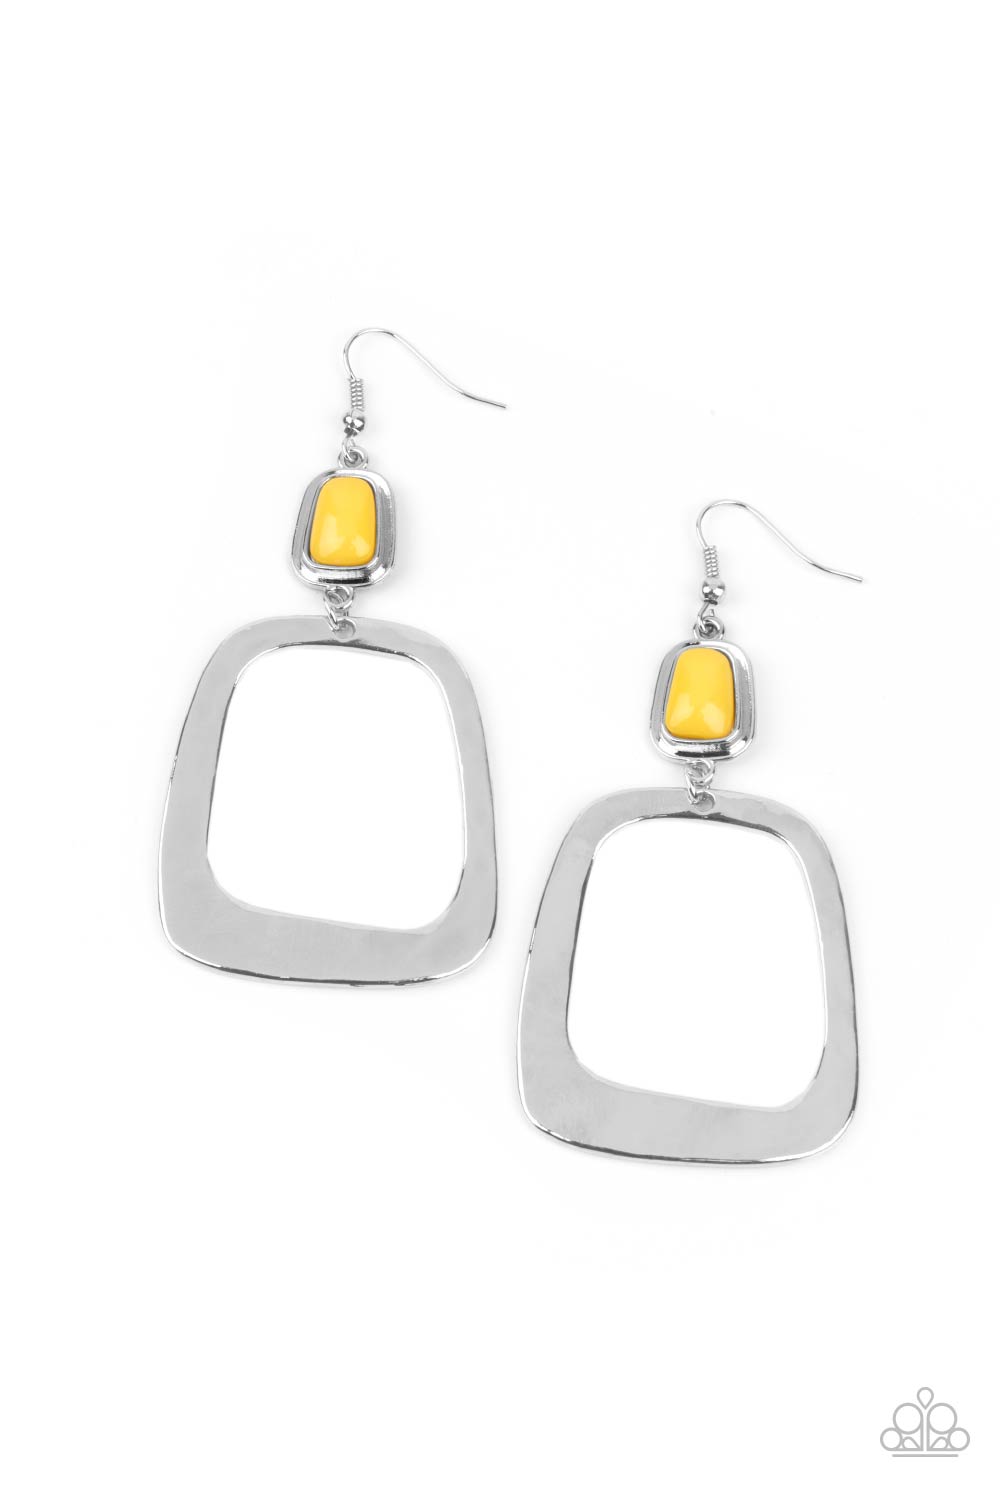 Paparazzi Accessories Material Girl Mod - Yellow Earrings - Lady T Accessories